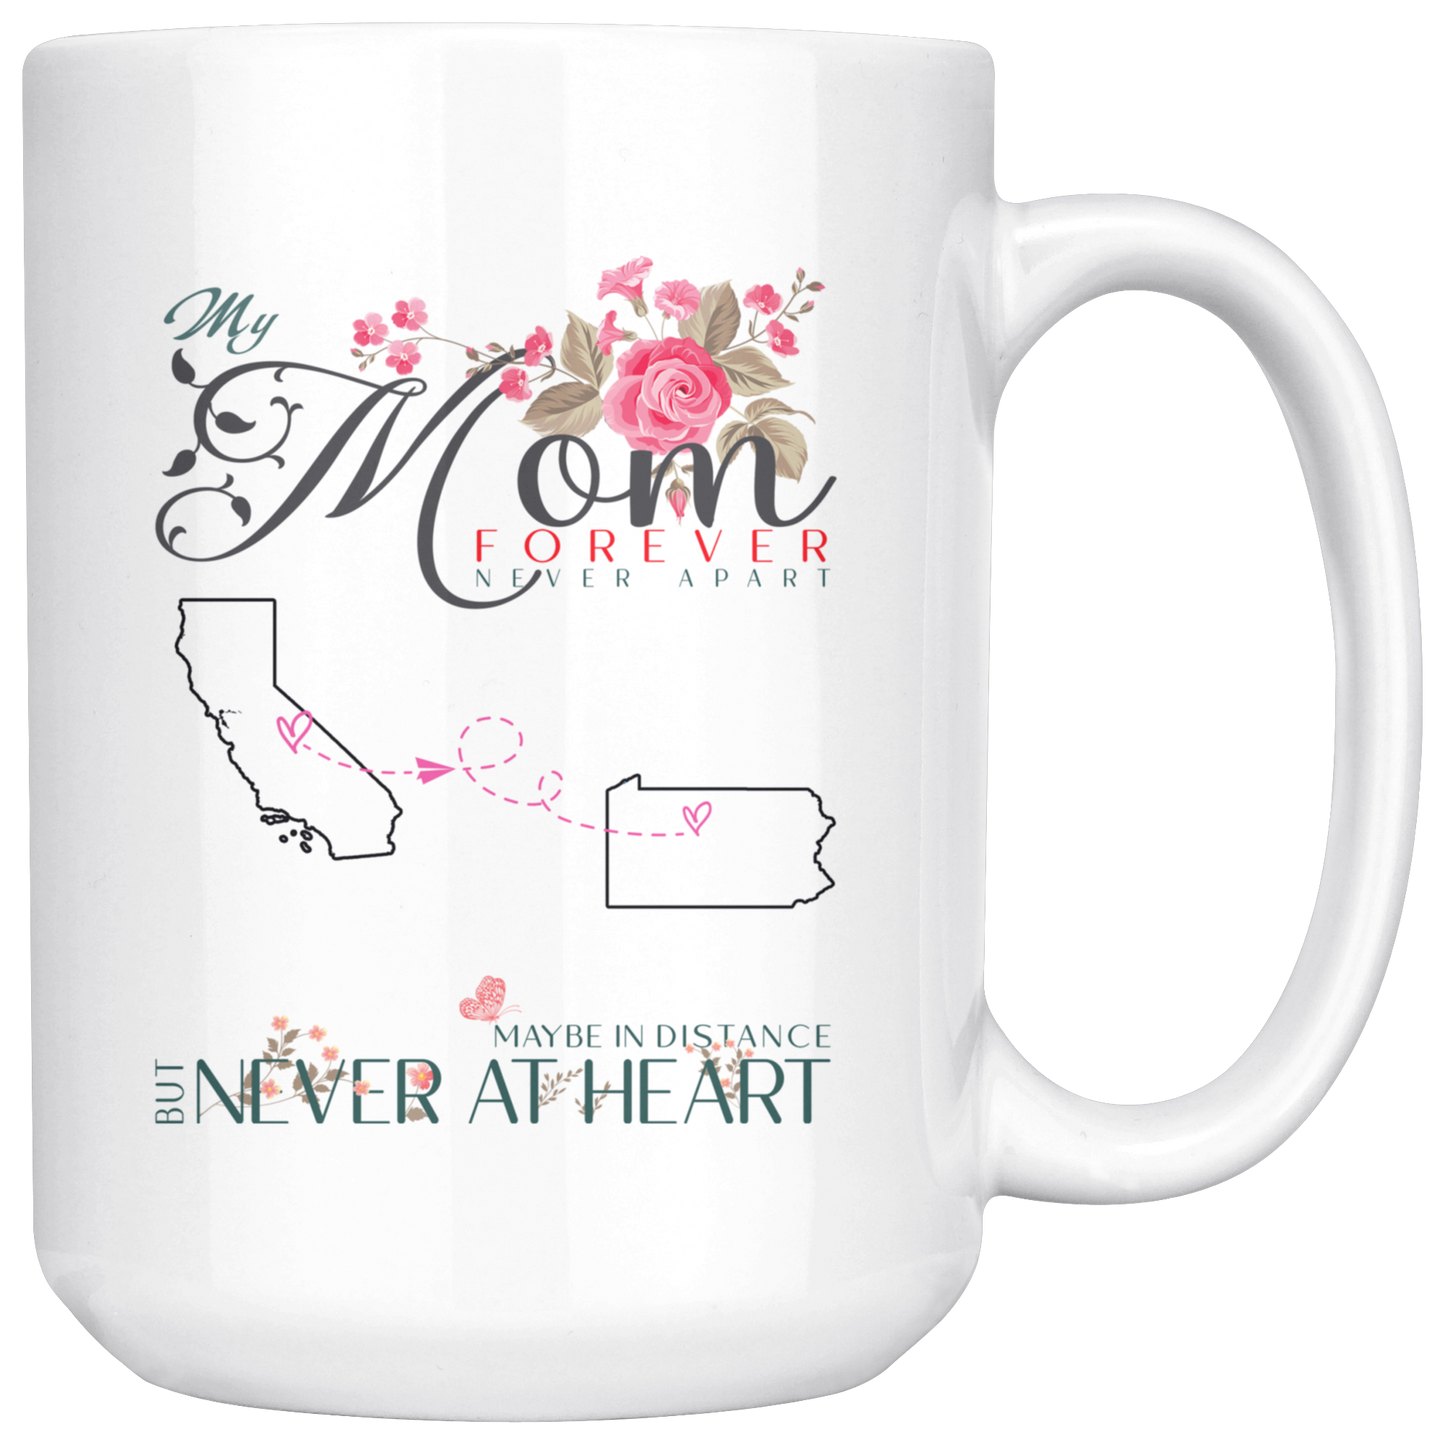 M-20321571-sp-23549 - [ California | Pennsylvania ]Personalized Mothers Day Coffee Mug - My Mom Forever Never A